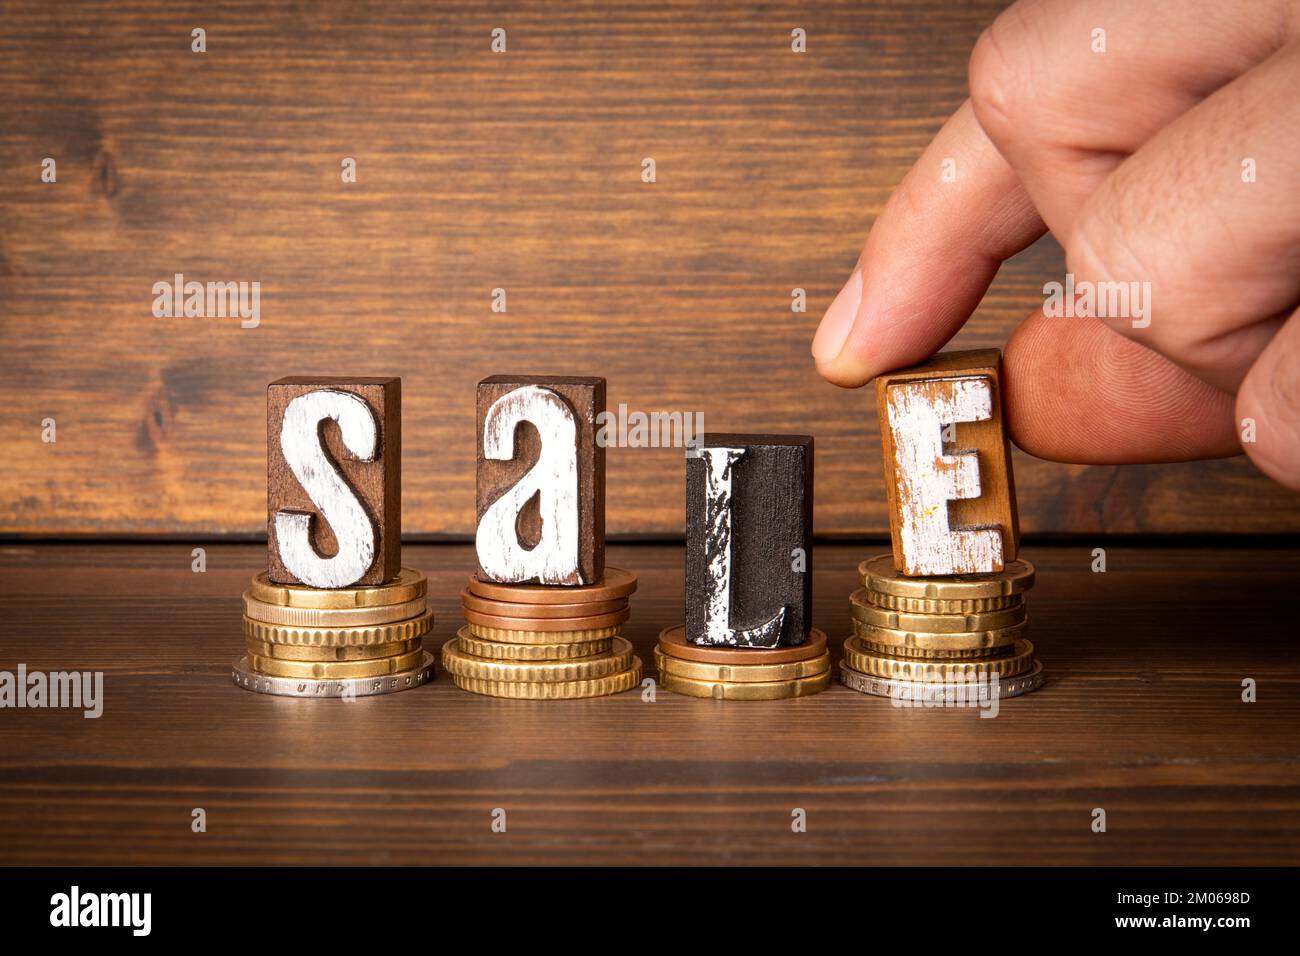 SALE, Business Concept. Change and wooden alphabet letters. Stock Photo